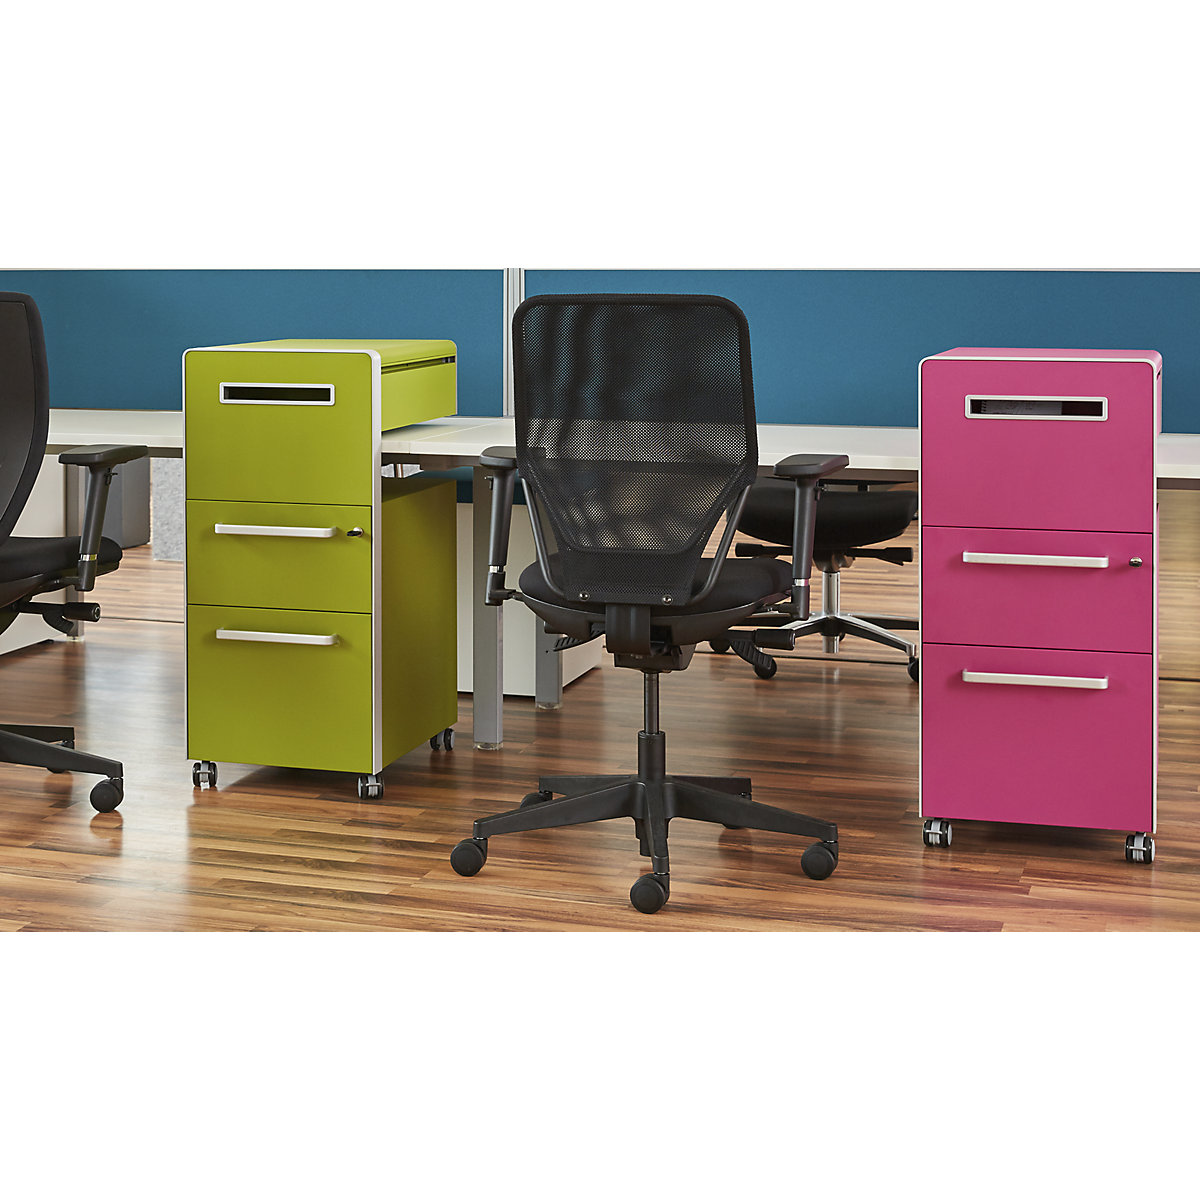 Bite™ pedestal furniture, with 1 whiteboard, opens on the left side – BISLEY (Product illustration 4)-3